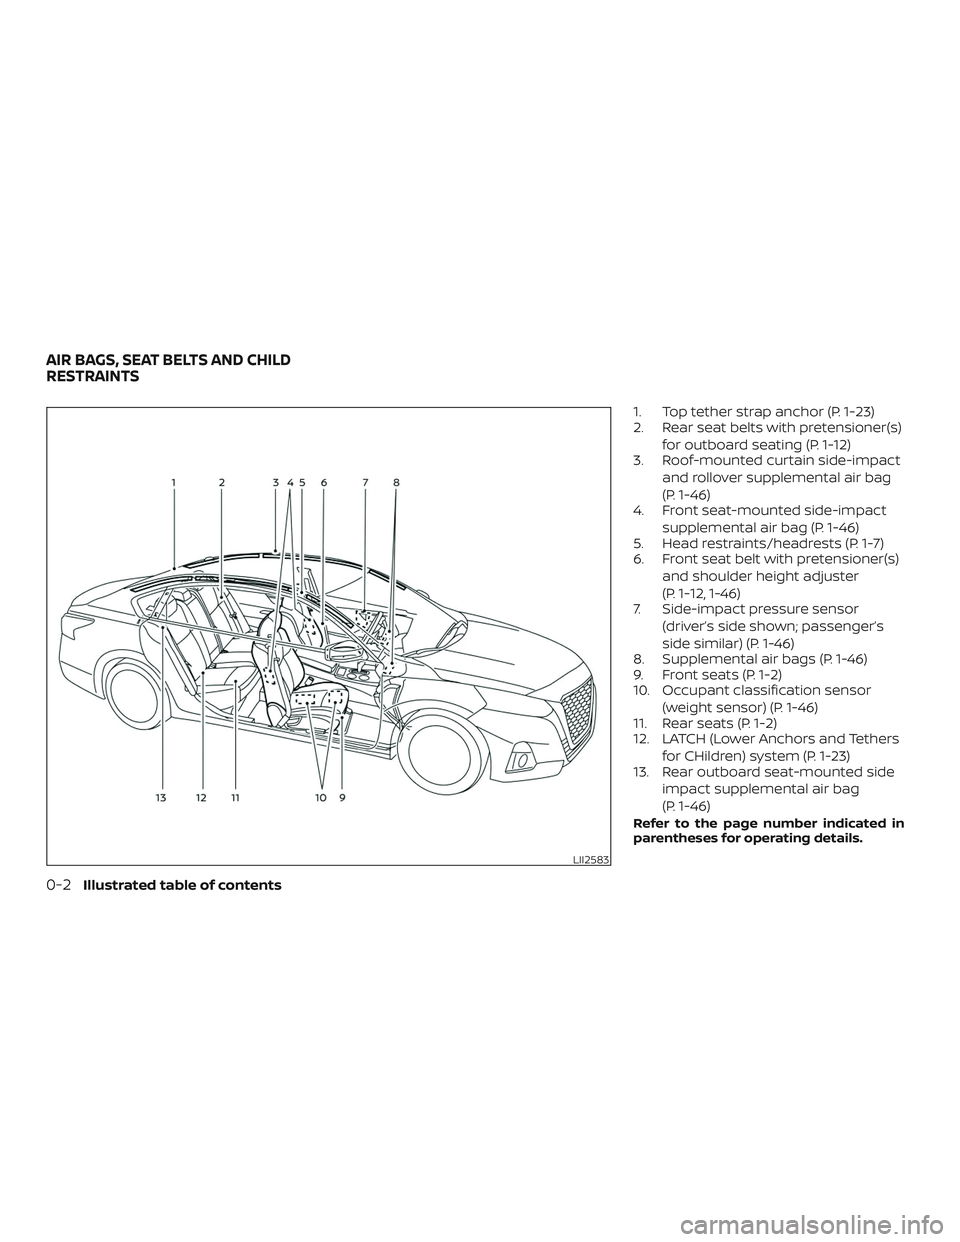 NISSAN ALTIMA 2019  Owner´s Manual 1. Top tether strap anchor (P. 1-23)
2. Rear seat belts with pretensioner(s)for outboard seating (P. 1-12)
3. Roof-mounted curtain side-impact
and rollover supplemental air bag
(P. 1-46)
4. Front seat